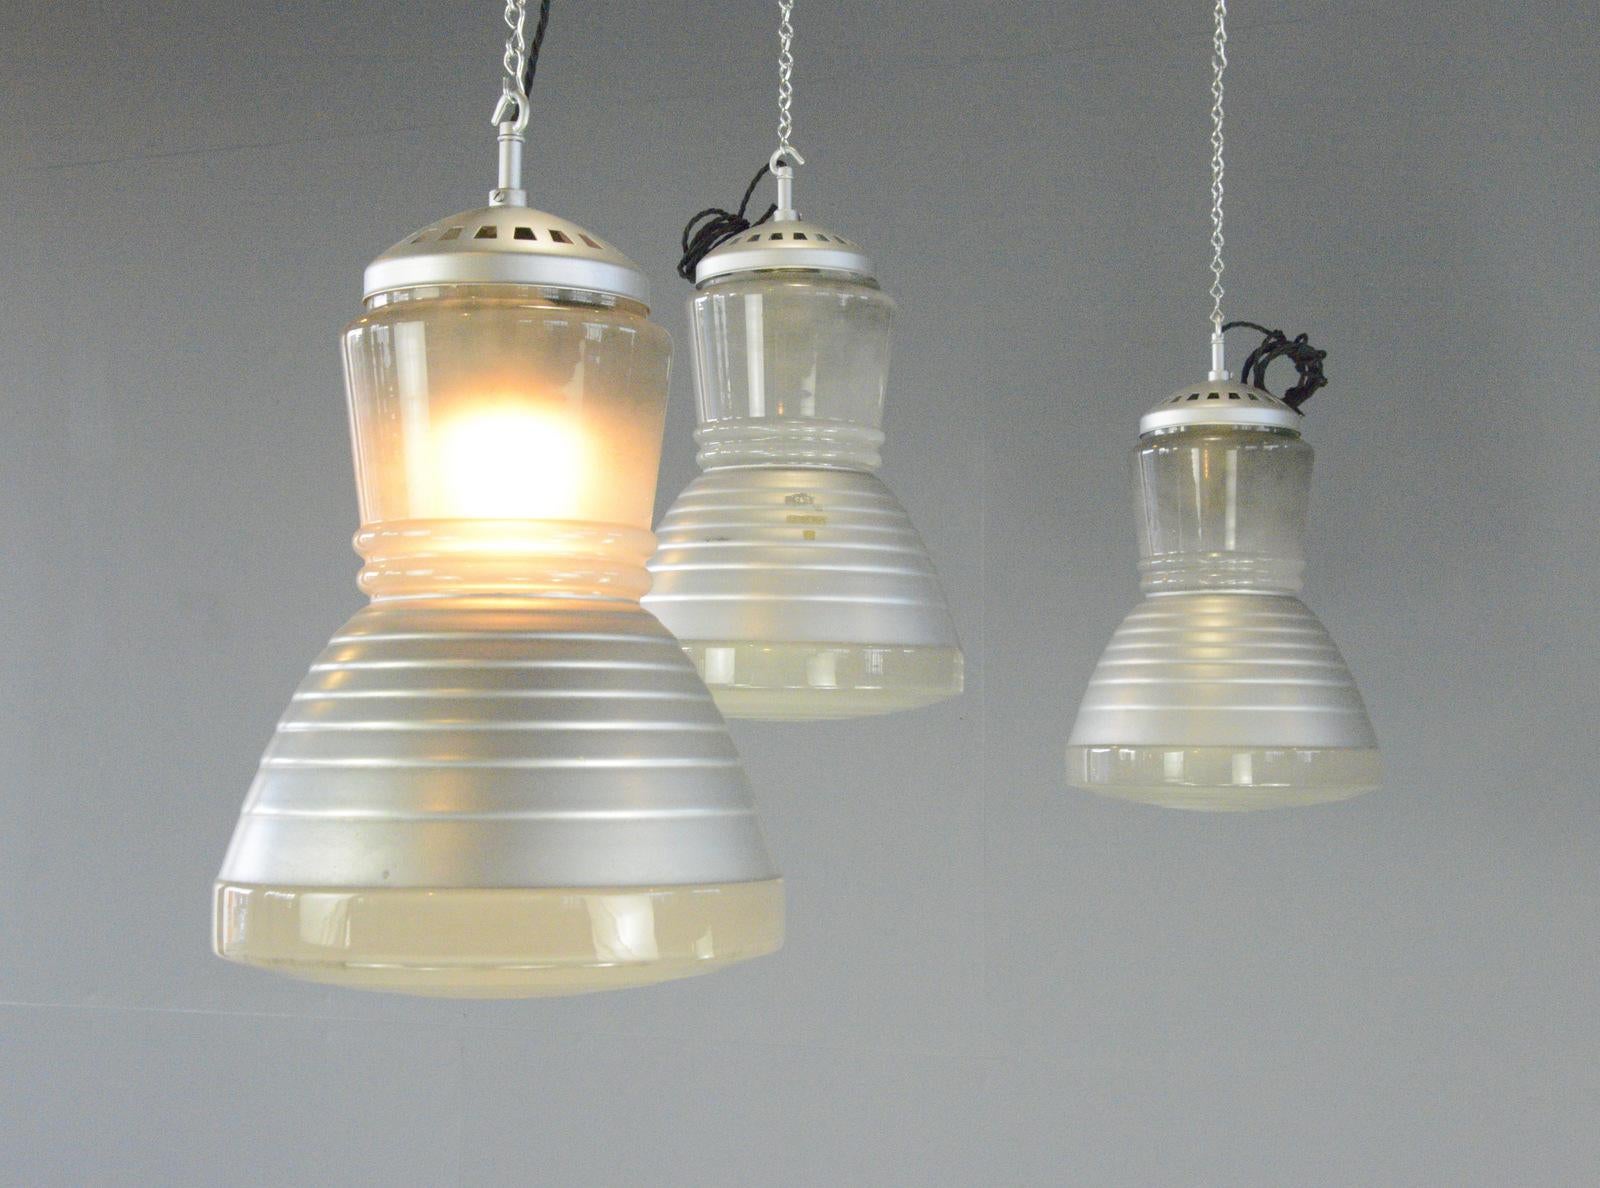 Bauhaus Pendant Lights By Adolf Meyer For Zeiss Ikon Circa 1930s For Sale